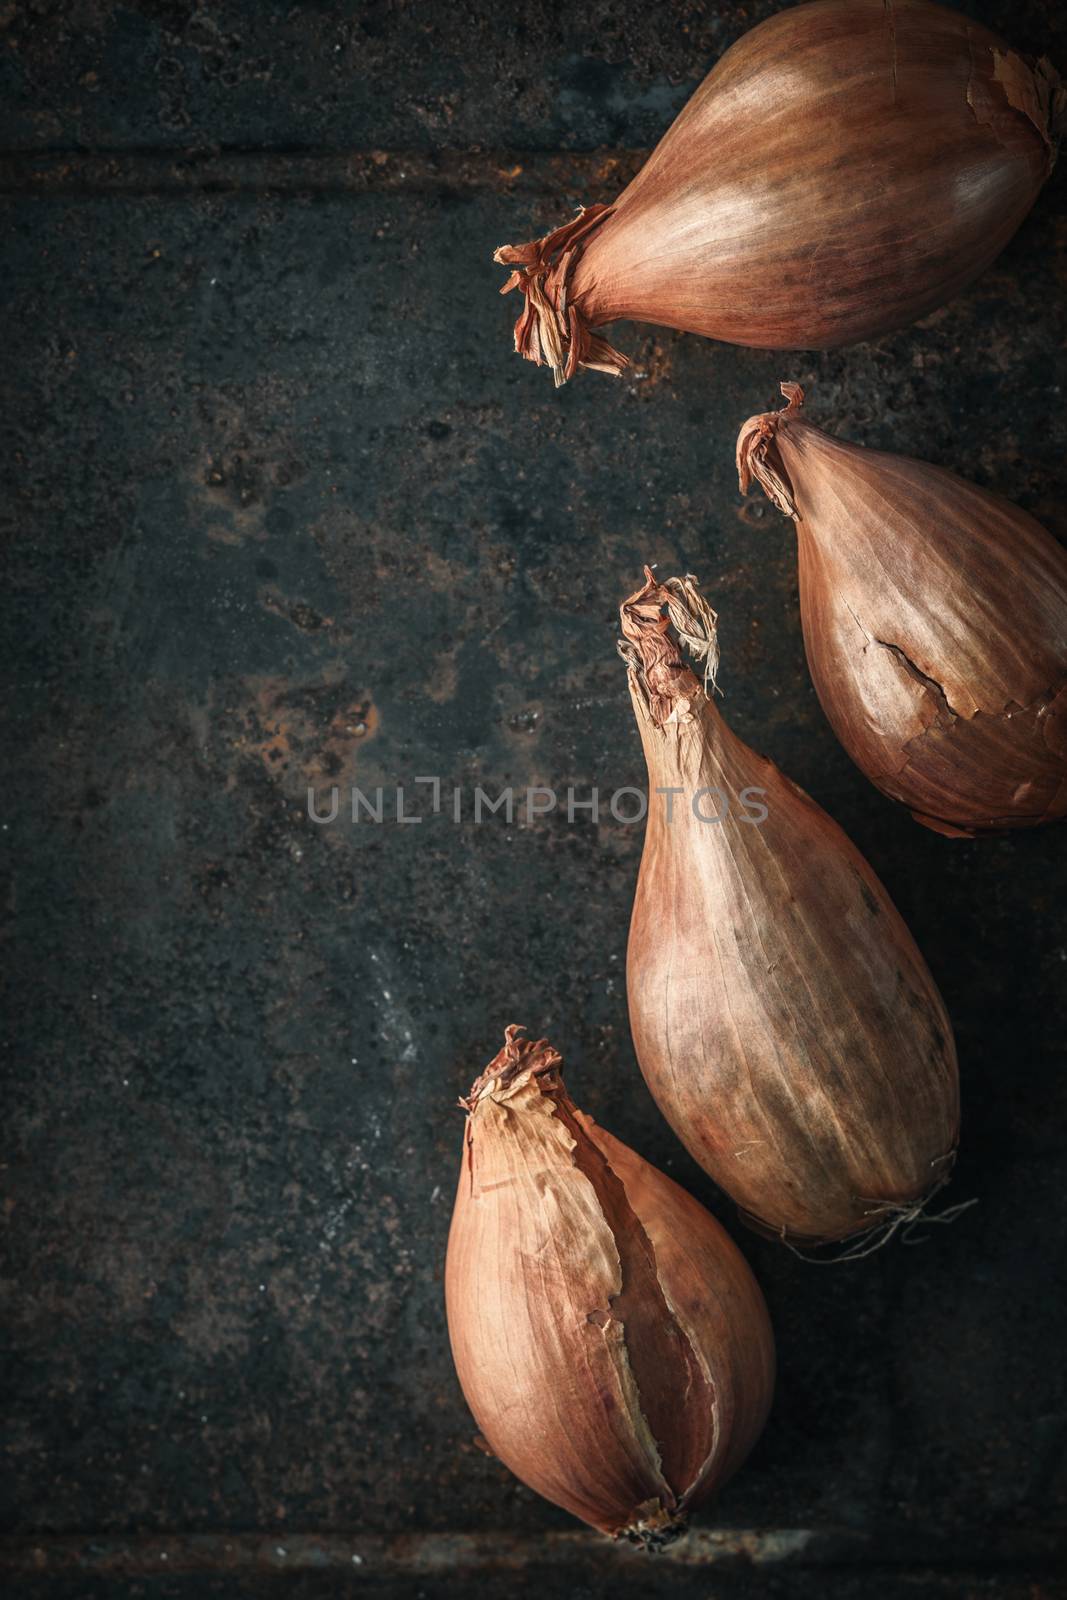 Shallots  on the  old metal background  vertical